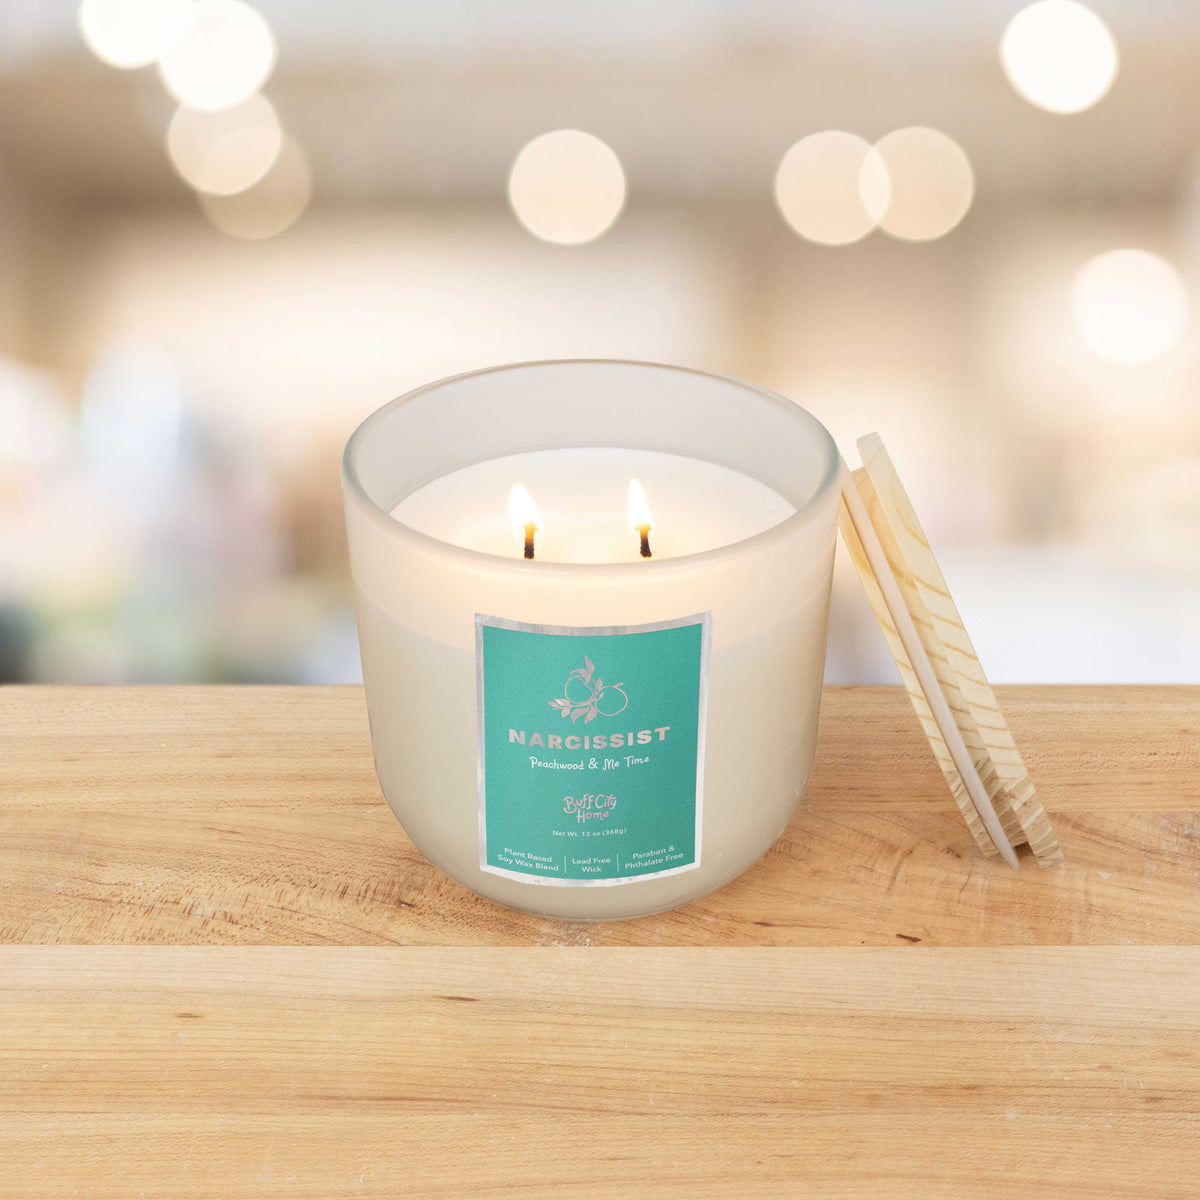 Narcissist 2-Wick Candle